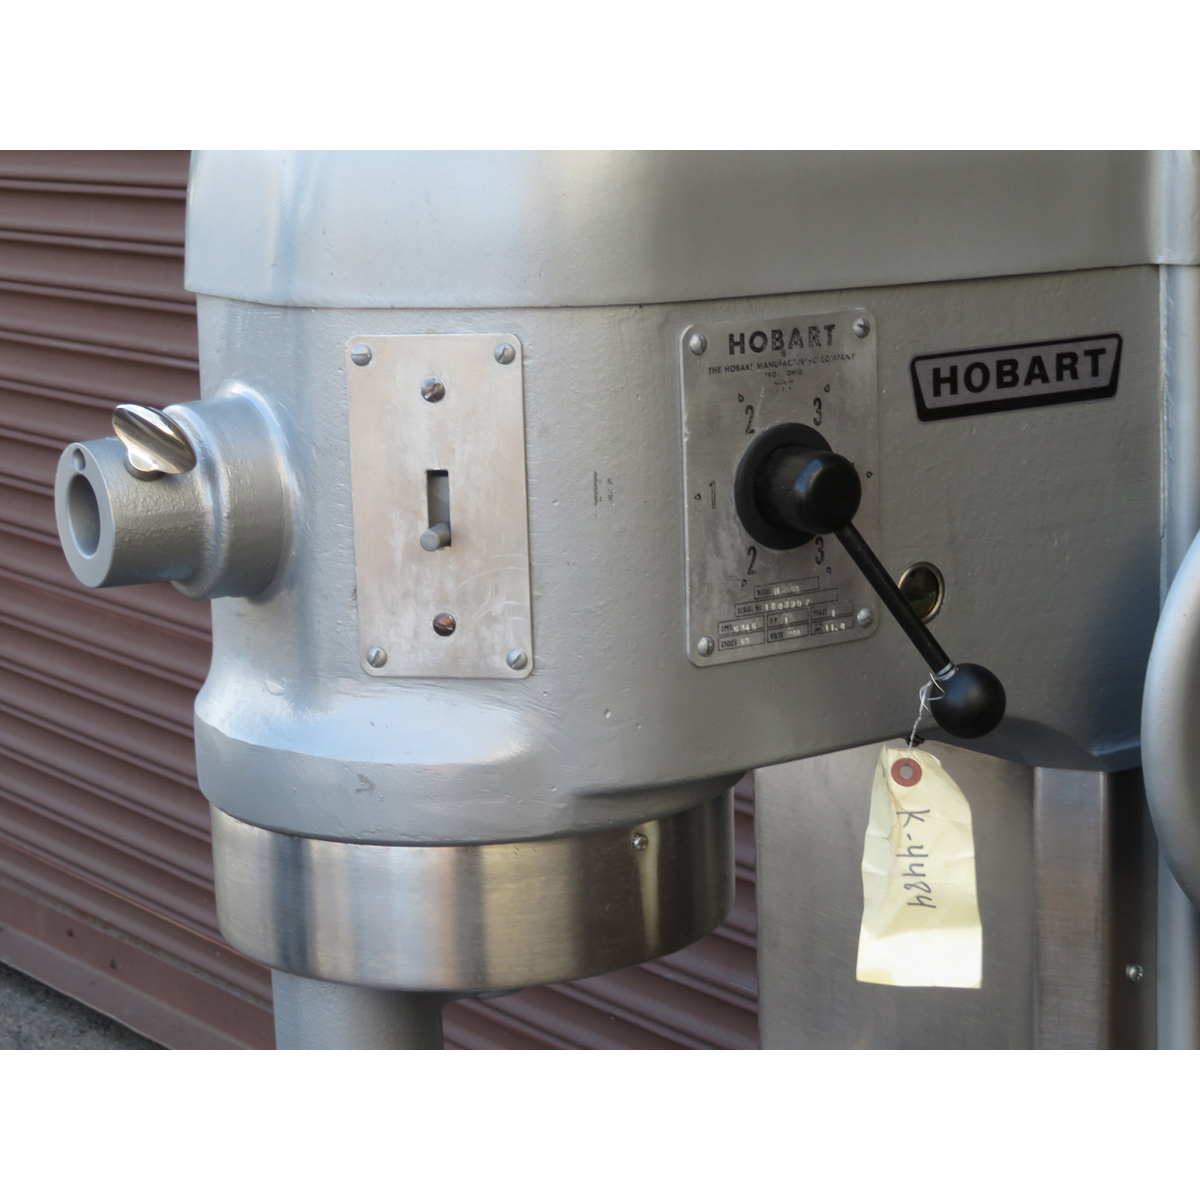 Hobart 60 Quart H600 Mixer, Used Excellent Condition image 2